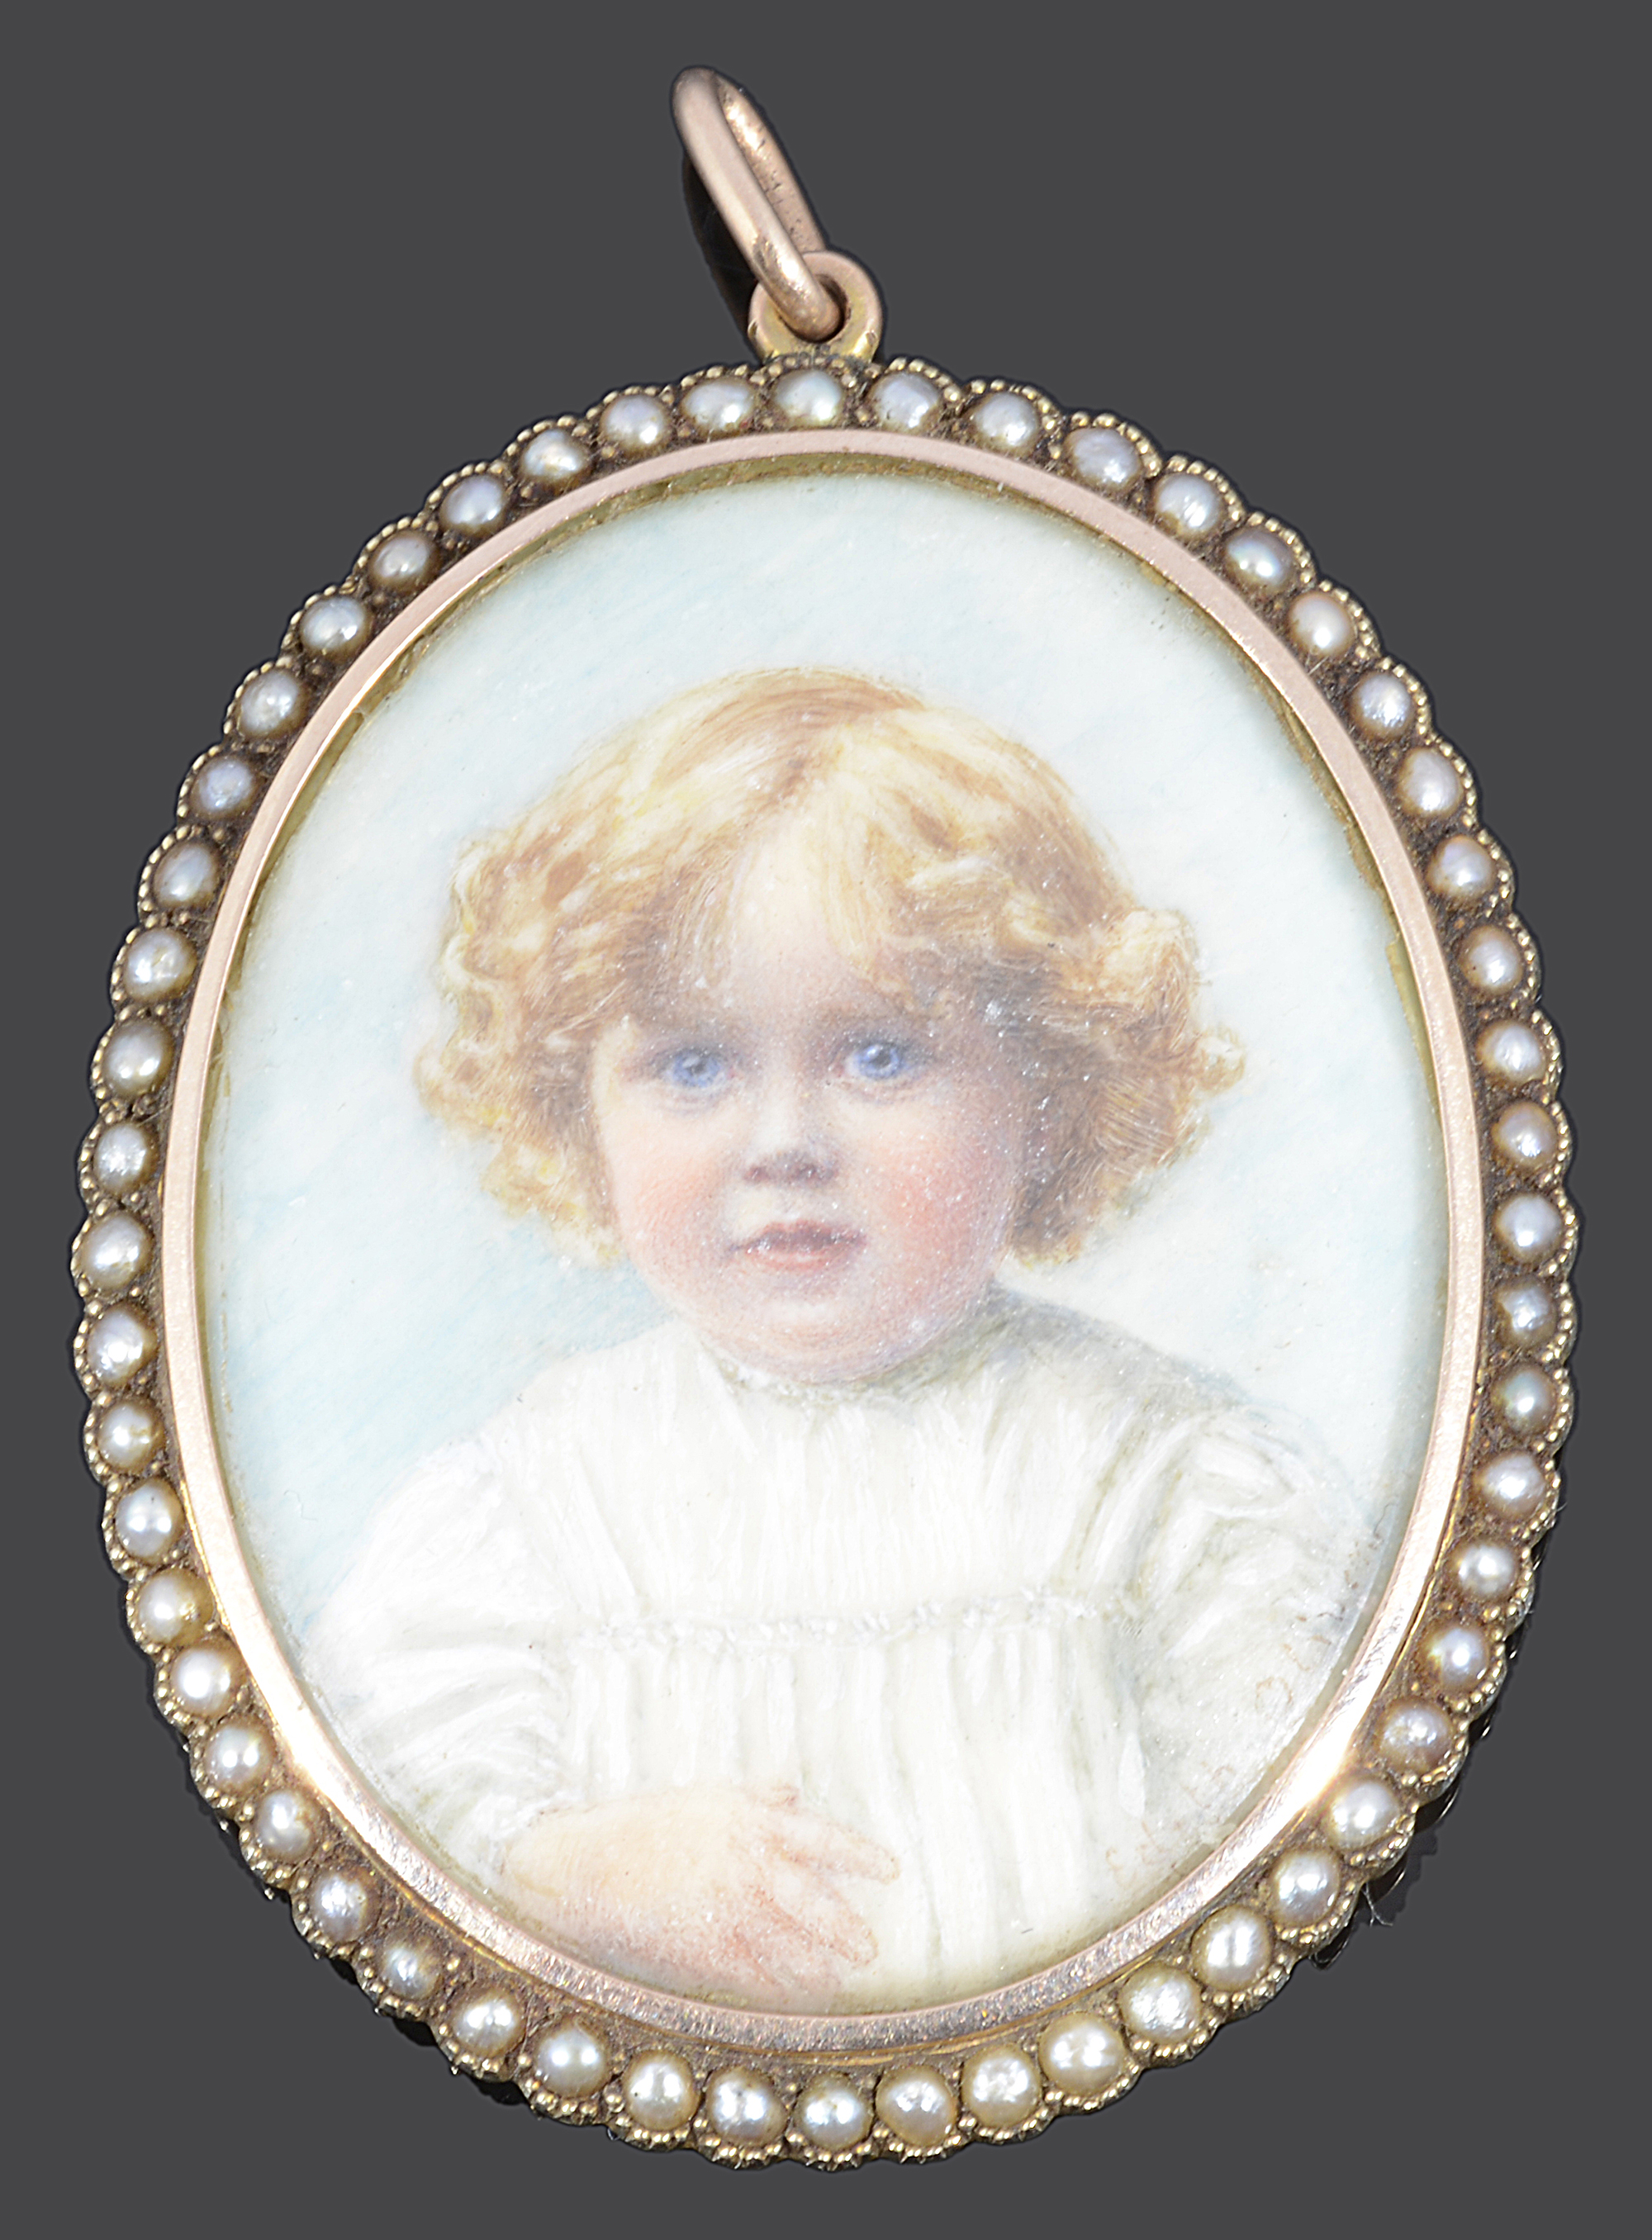 Edith Oliver, Edwardian portrait miniature of a child in gold and pearl set pendant locket